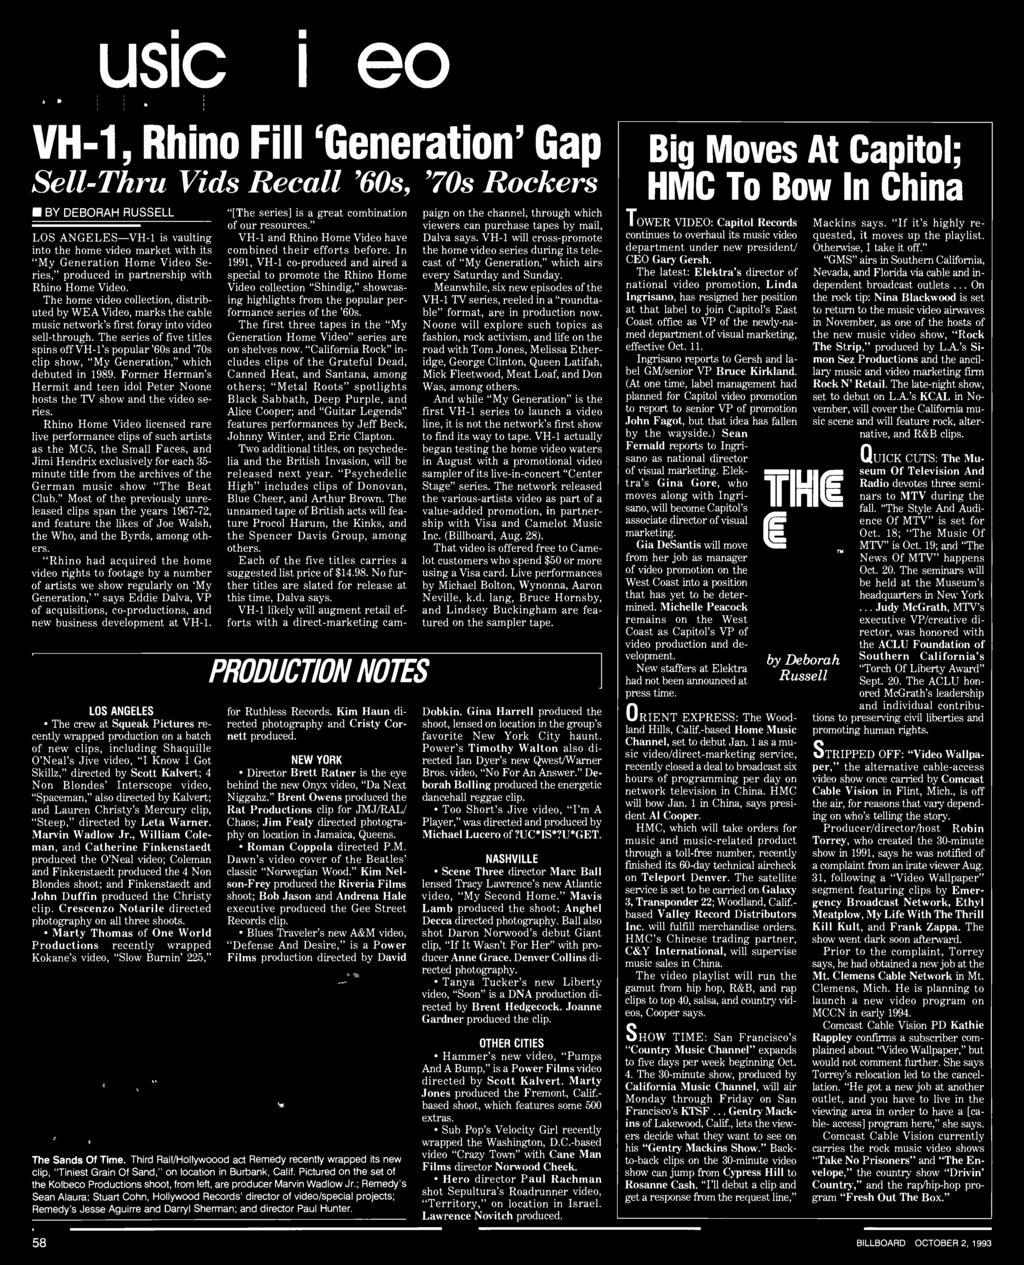 The series of five titles spins off VH -l's popular '60s and '70s clip show, "My Generation," which debuted in 989.